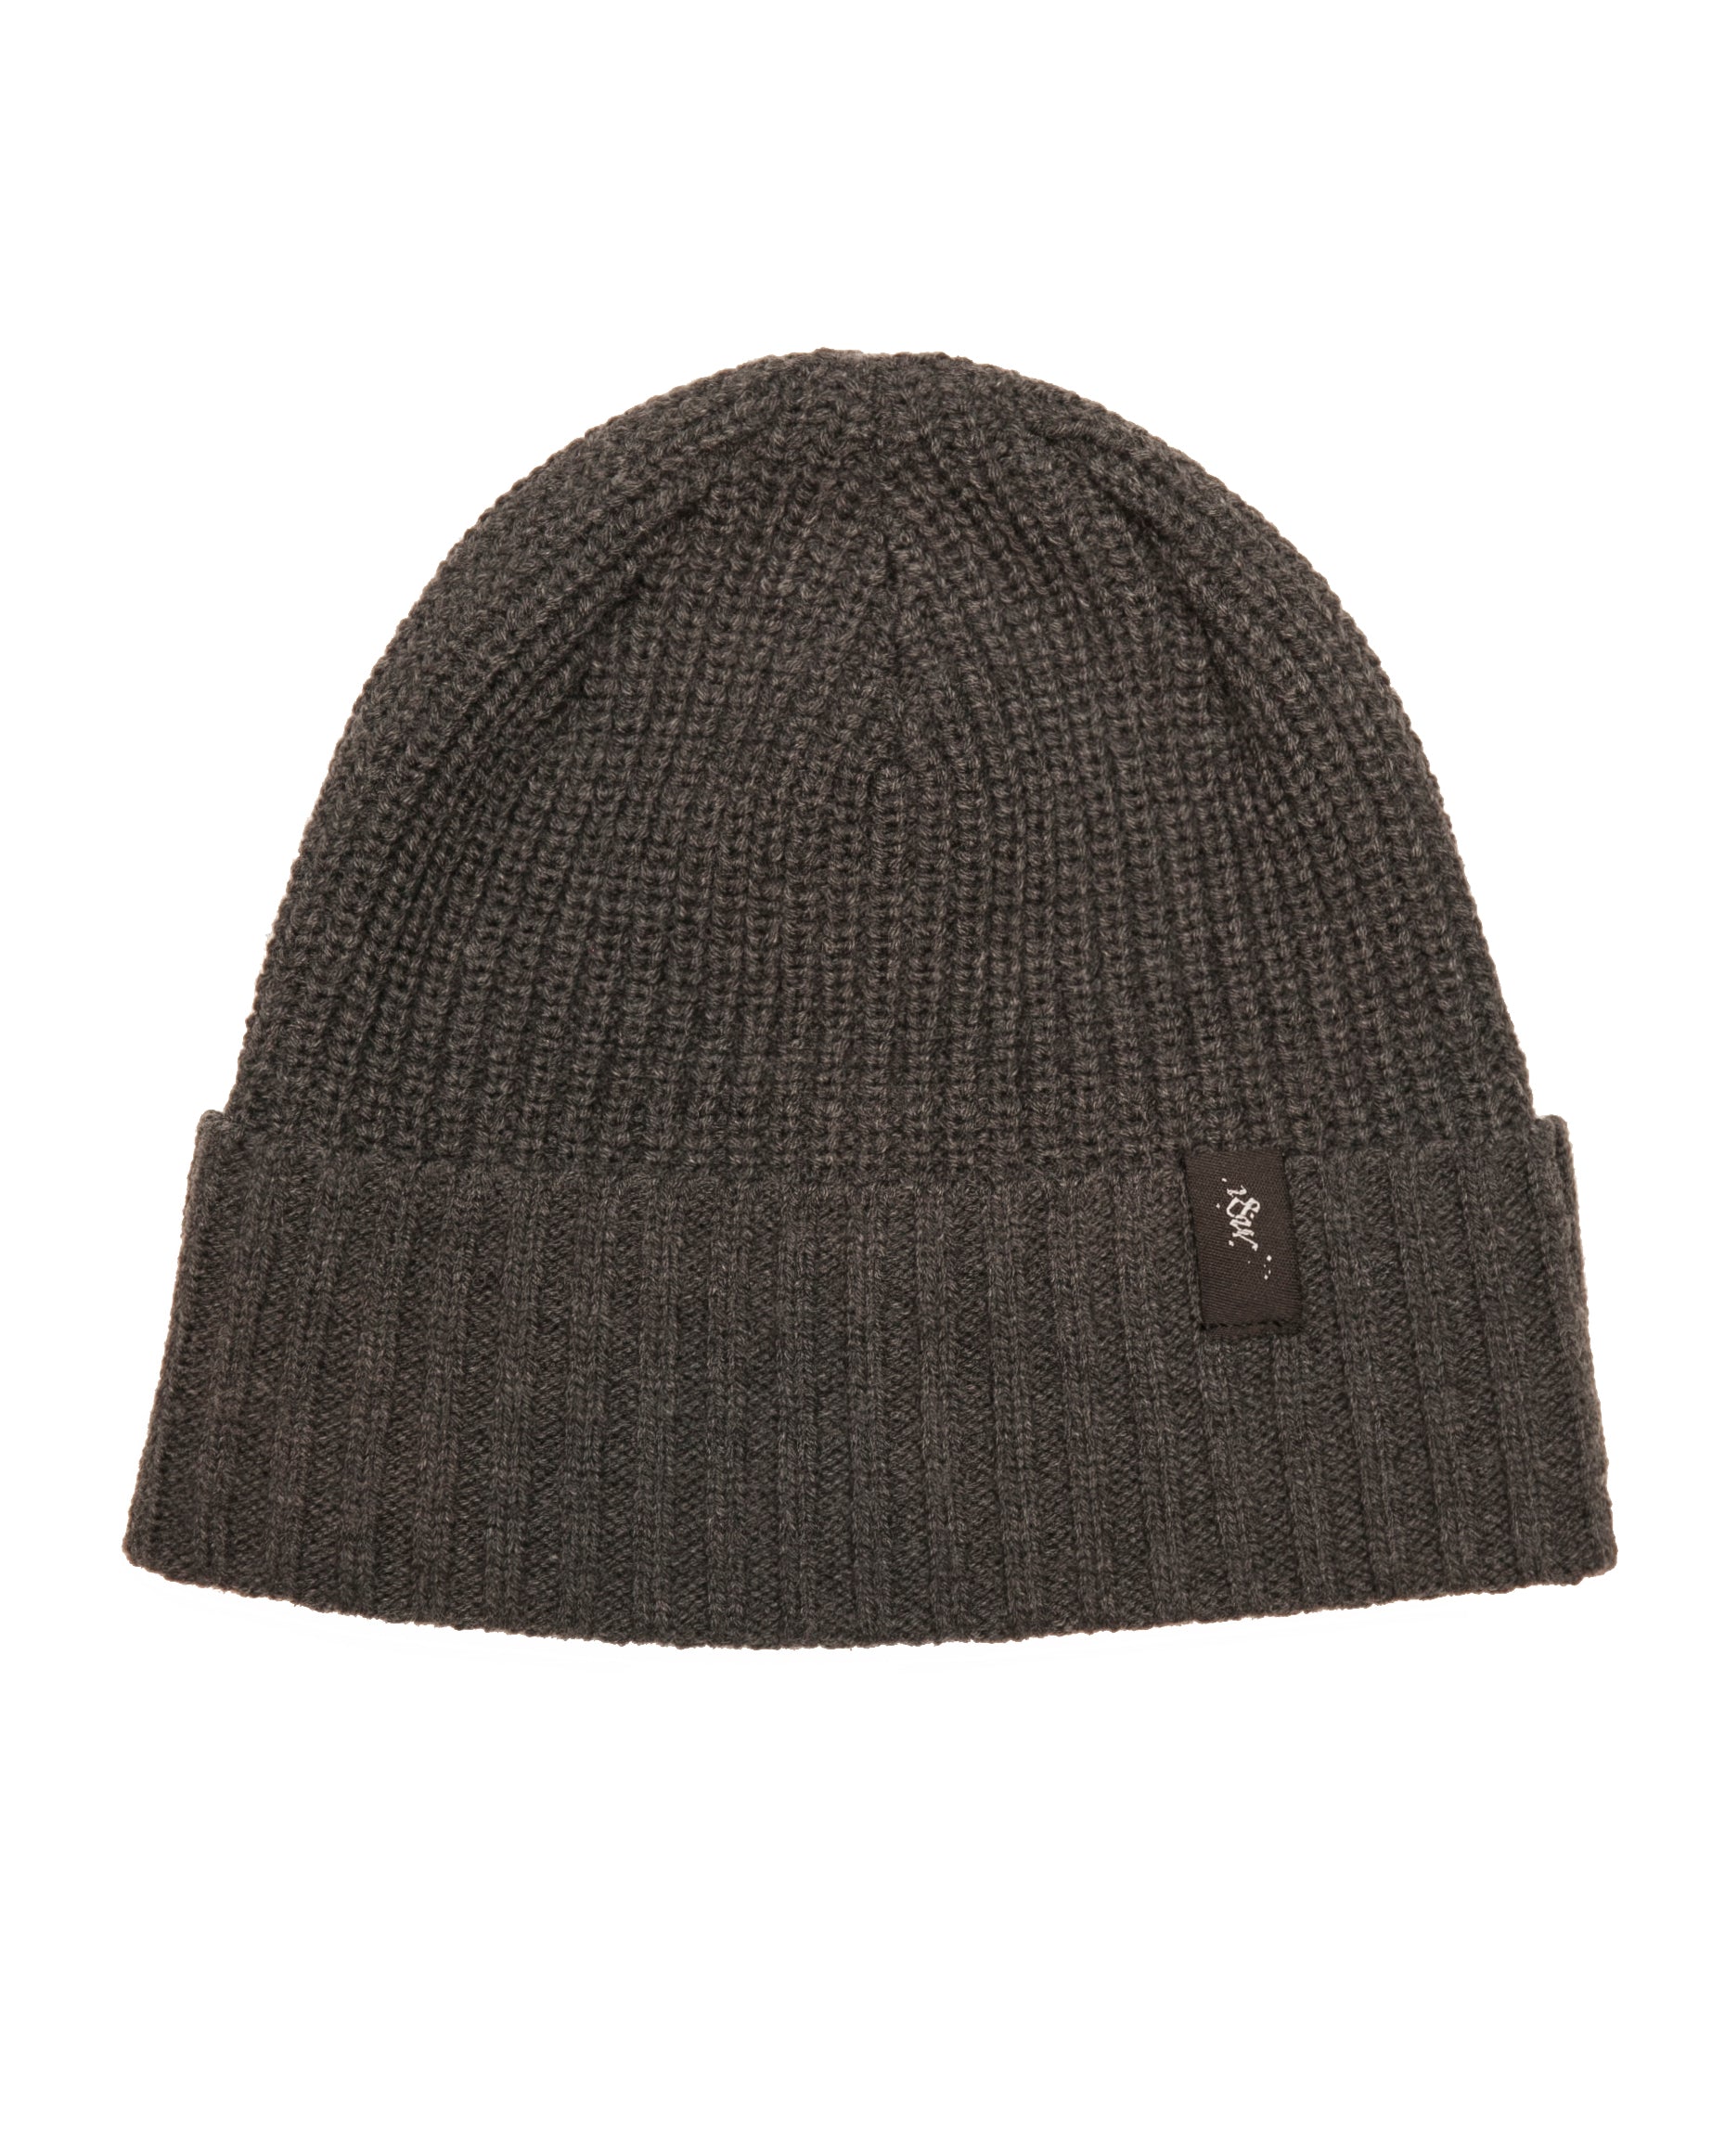 The Toque | Charcoal Ribbed Knit